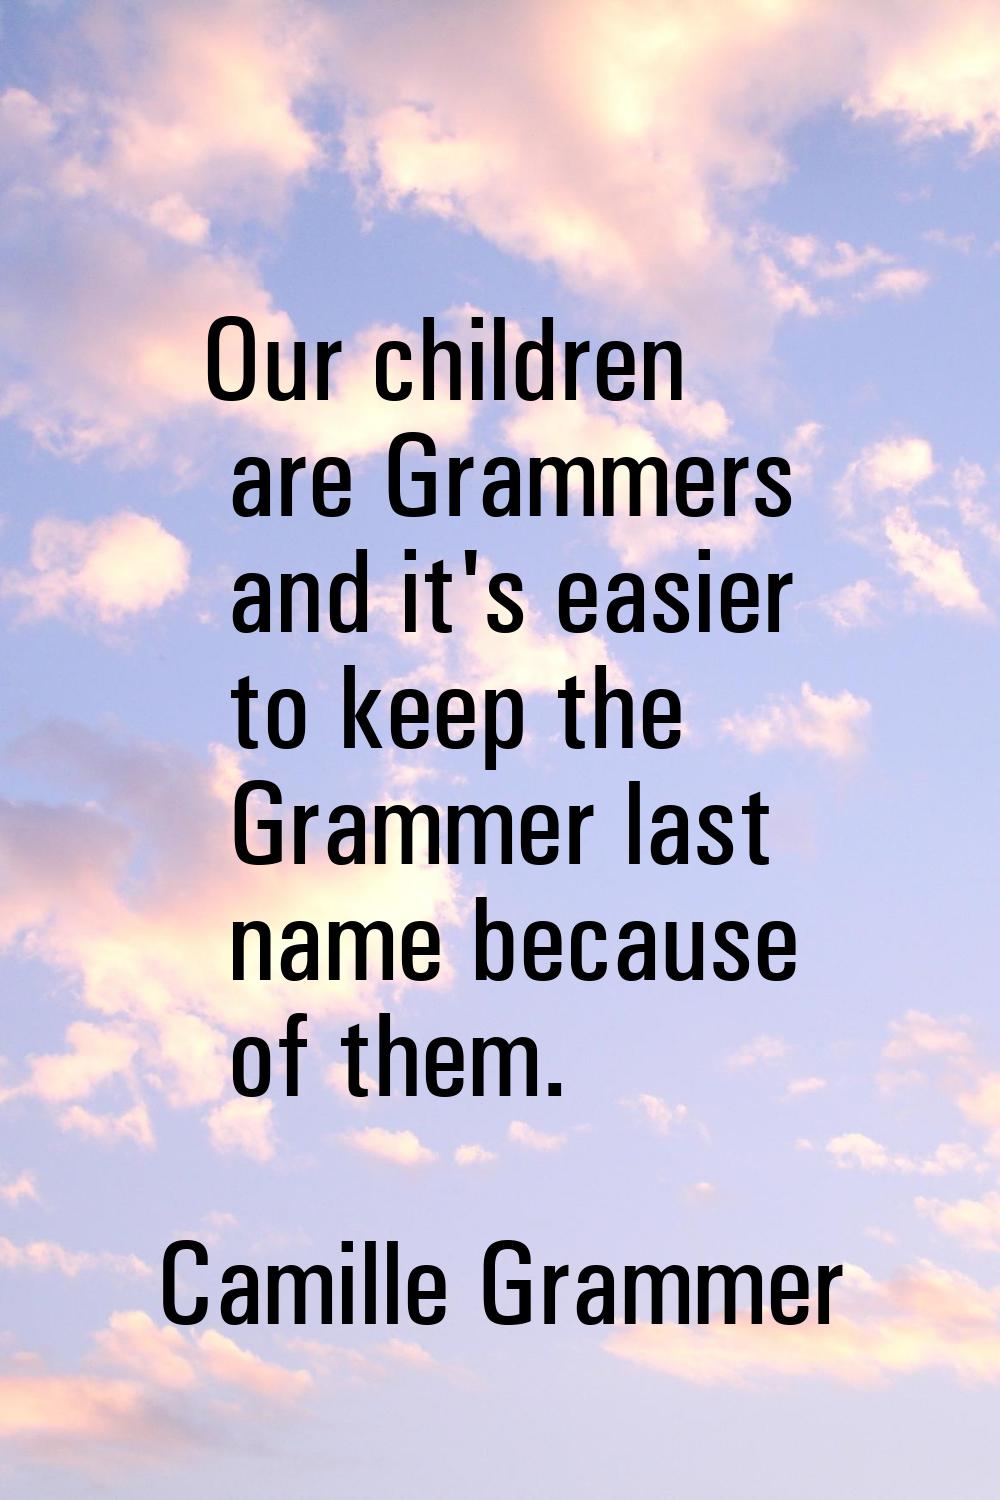 Our children are Grammers and it's easier to keep the Grammer last name because of them.